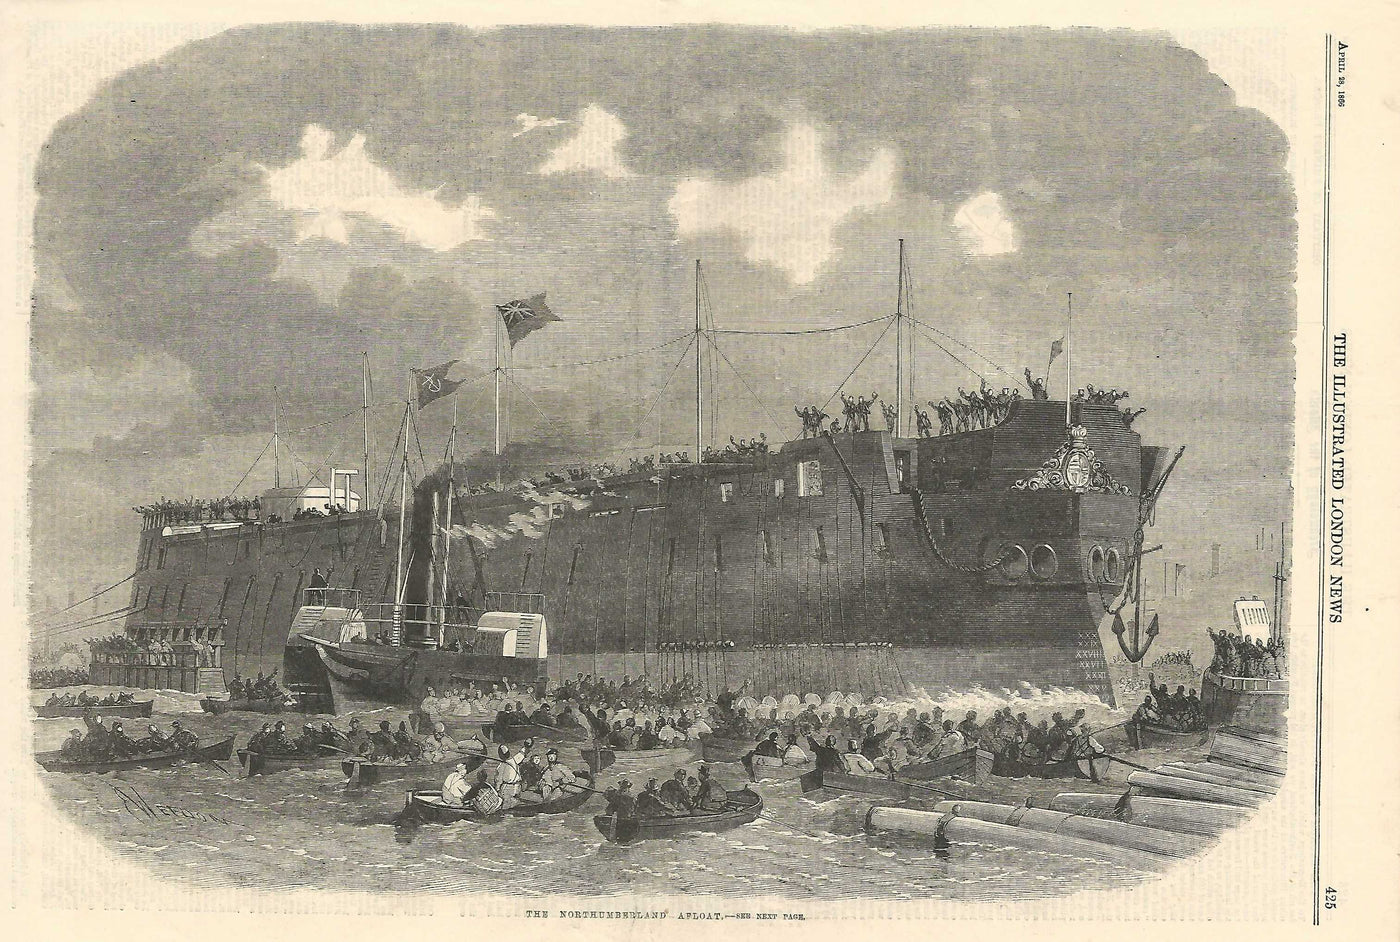 HMS Northumberland afloat on River Thames at Millwall 1866